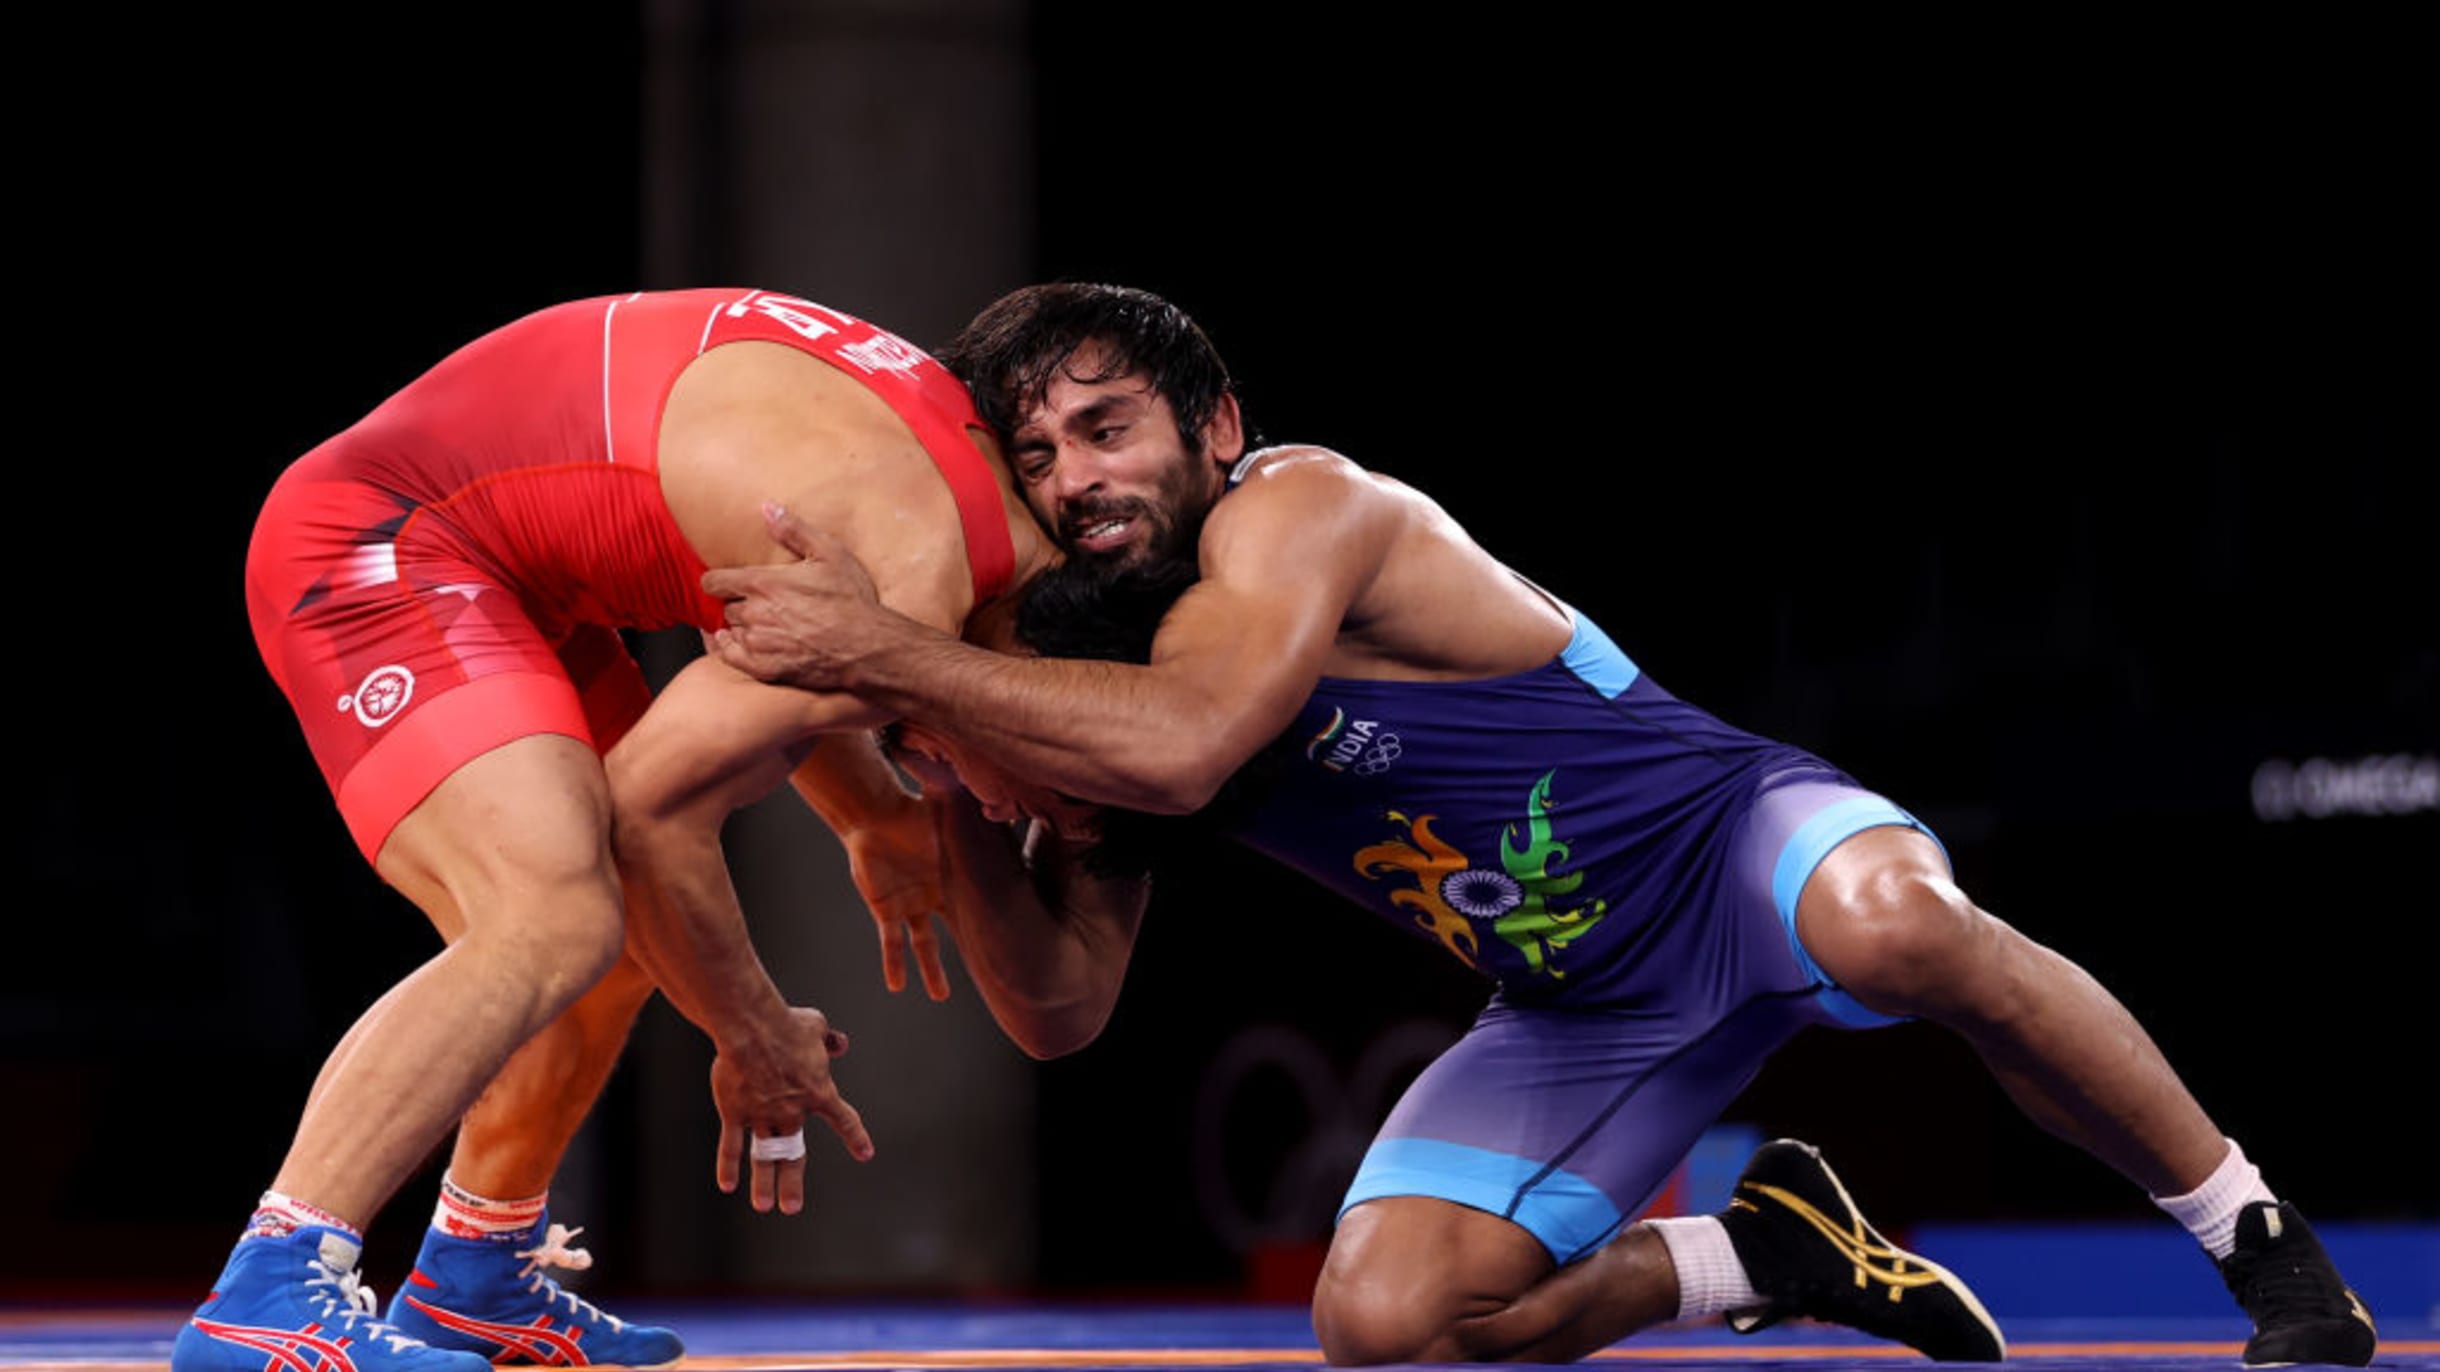 Yasar Dogu wrestling 2022 Bajrang Punia, Vinesh Phogat in action, watch live streaming in India